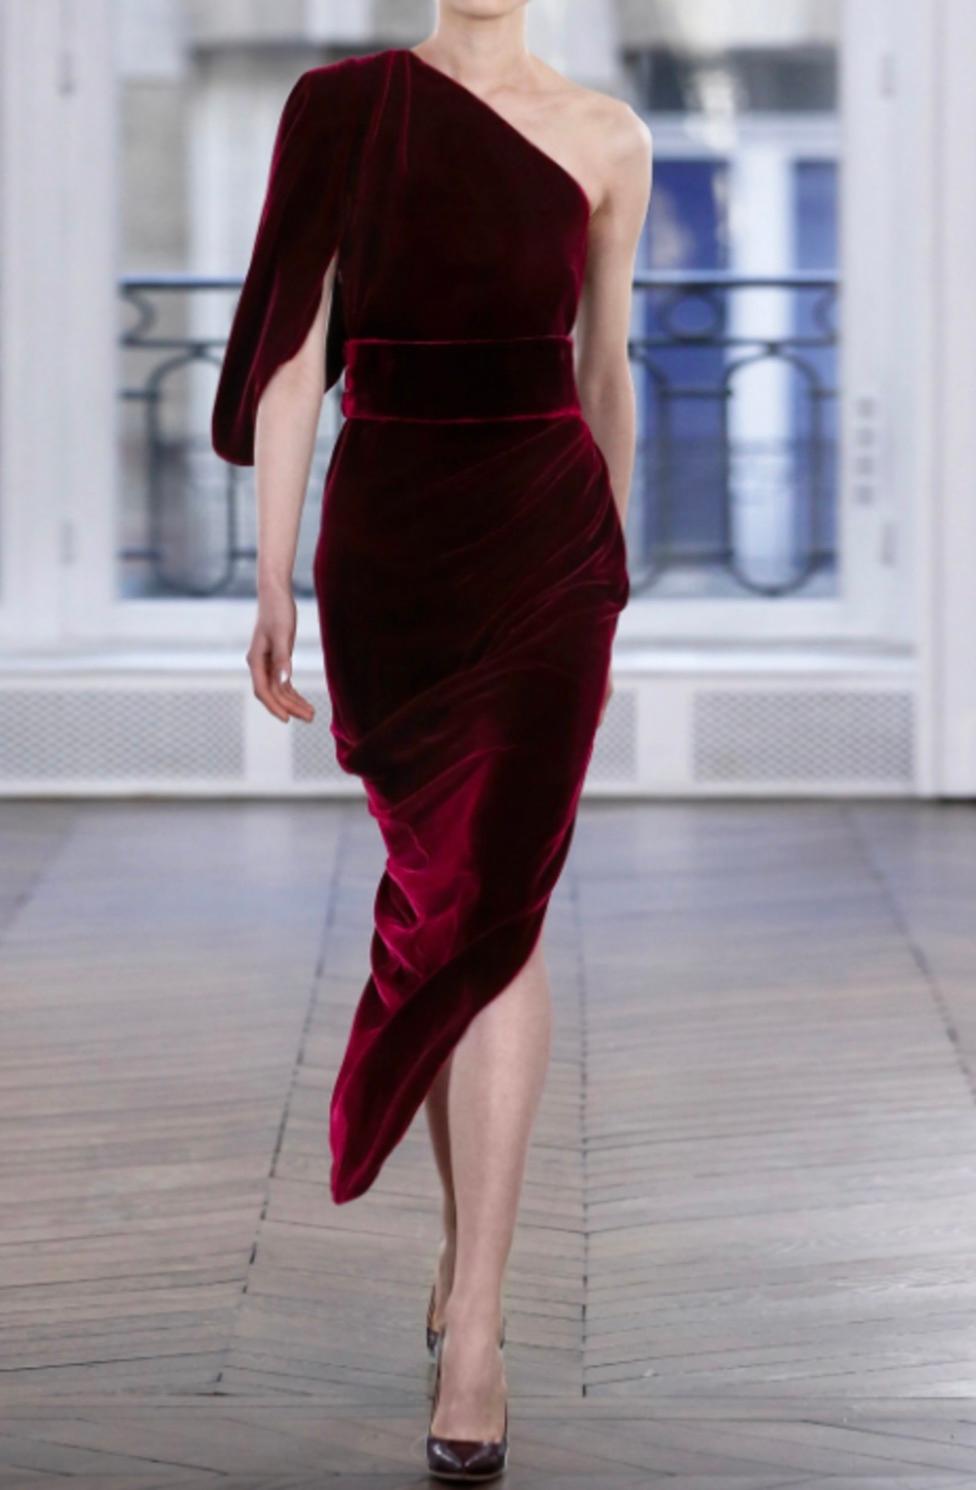 This stunning Ralph & Russo gown from the Fall 2018 collection, famously worn by Lady Gaga, embodies timeless elegance and drama. Crafted from sumptuous burgundy velvet, the Ava gown boasts a one-shoulder design with exquisite draping and an